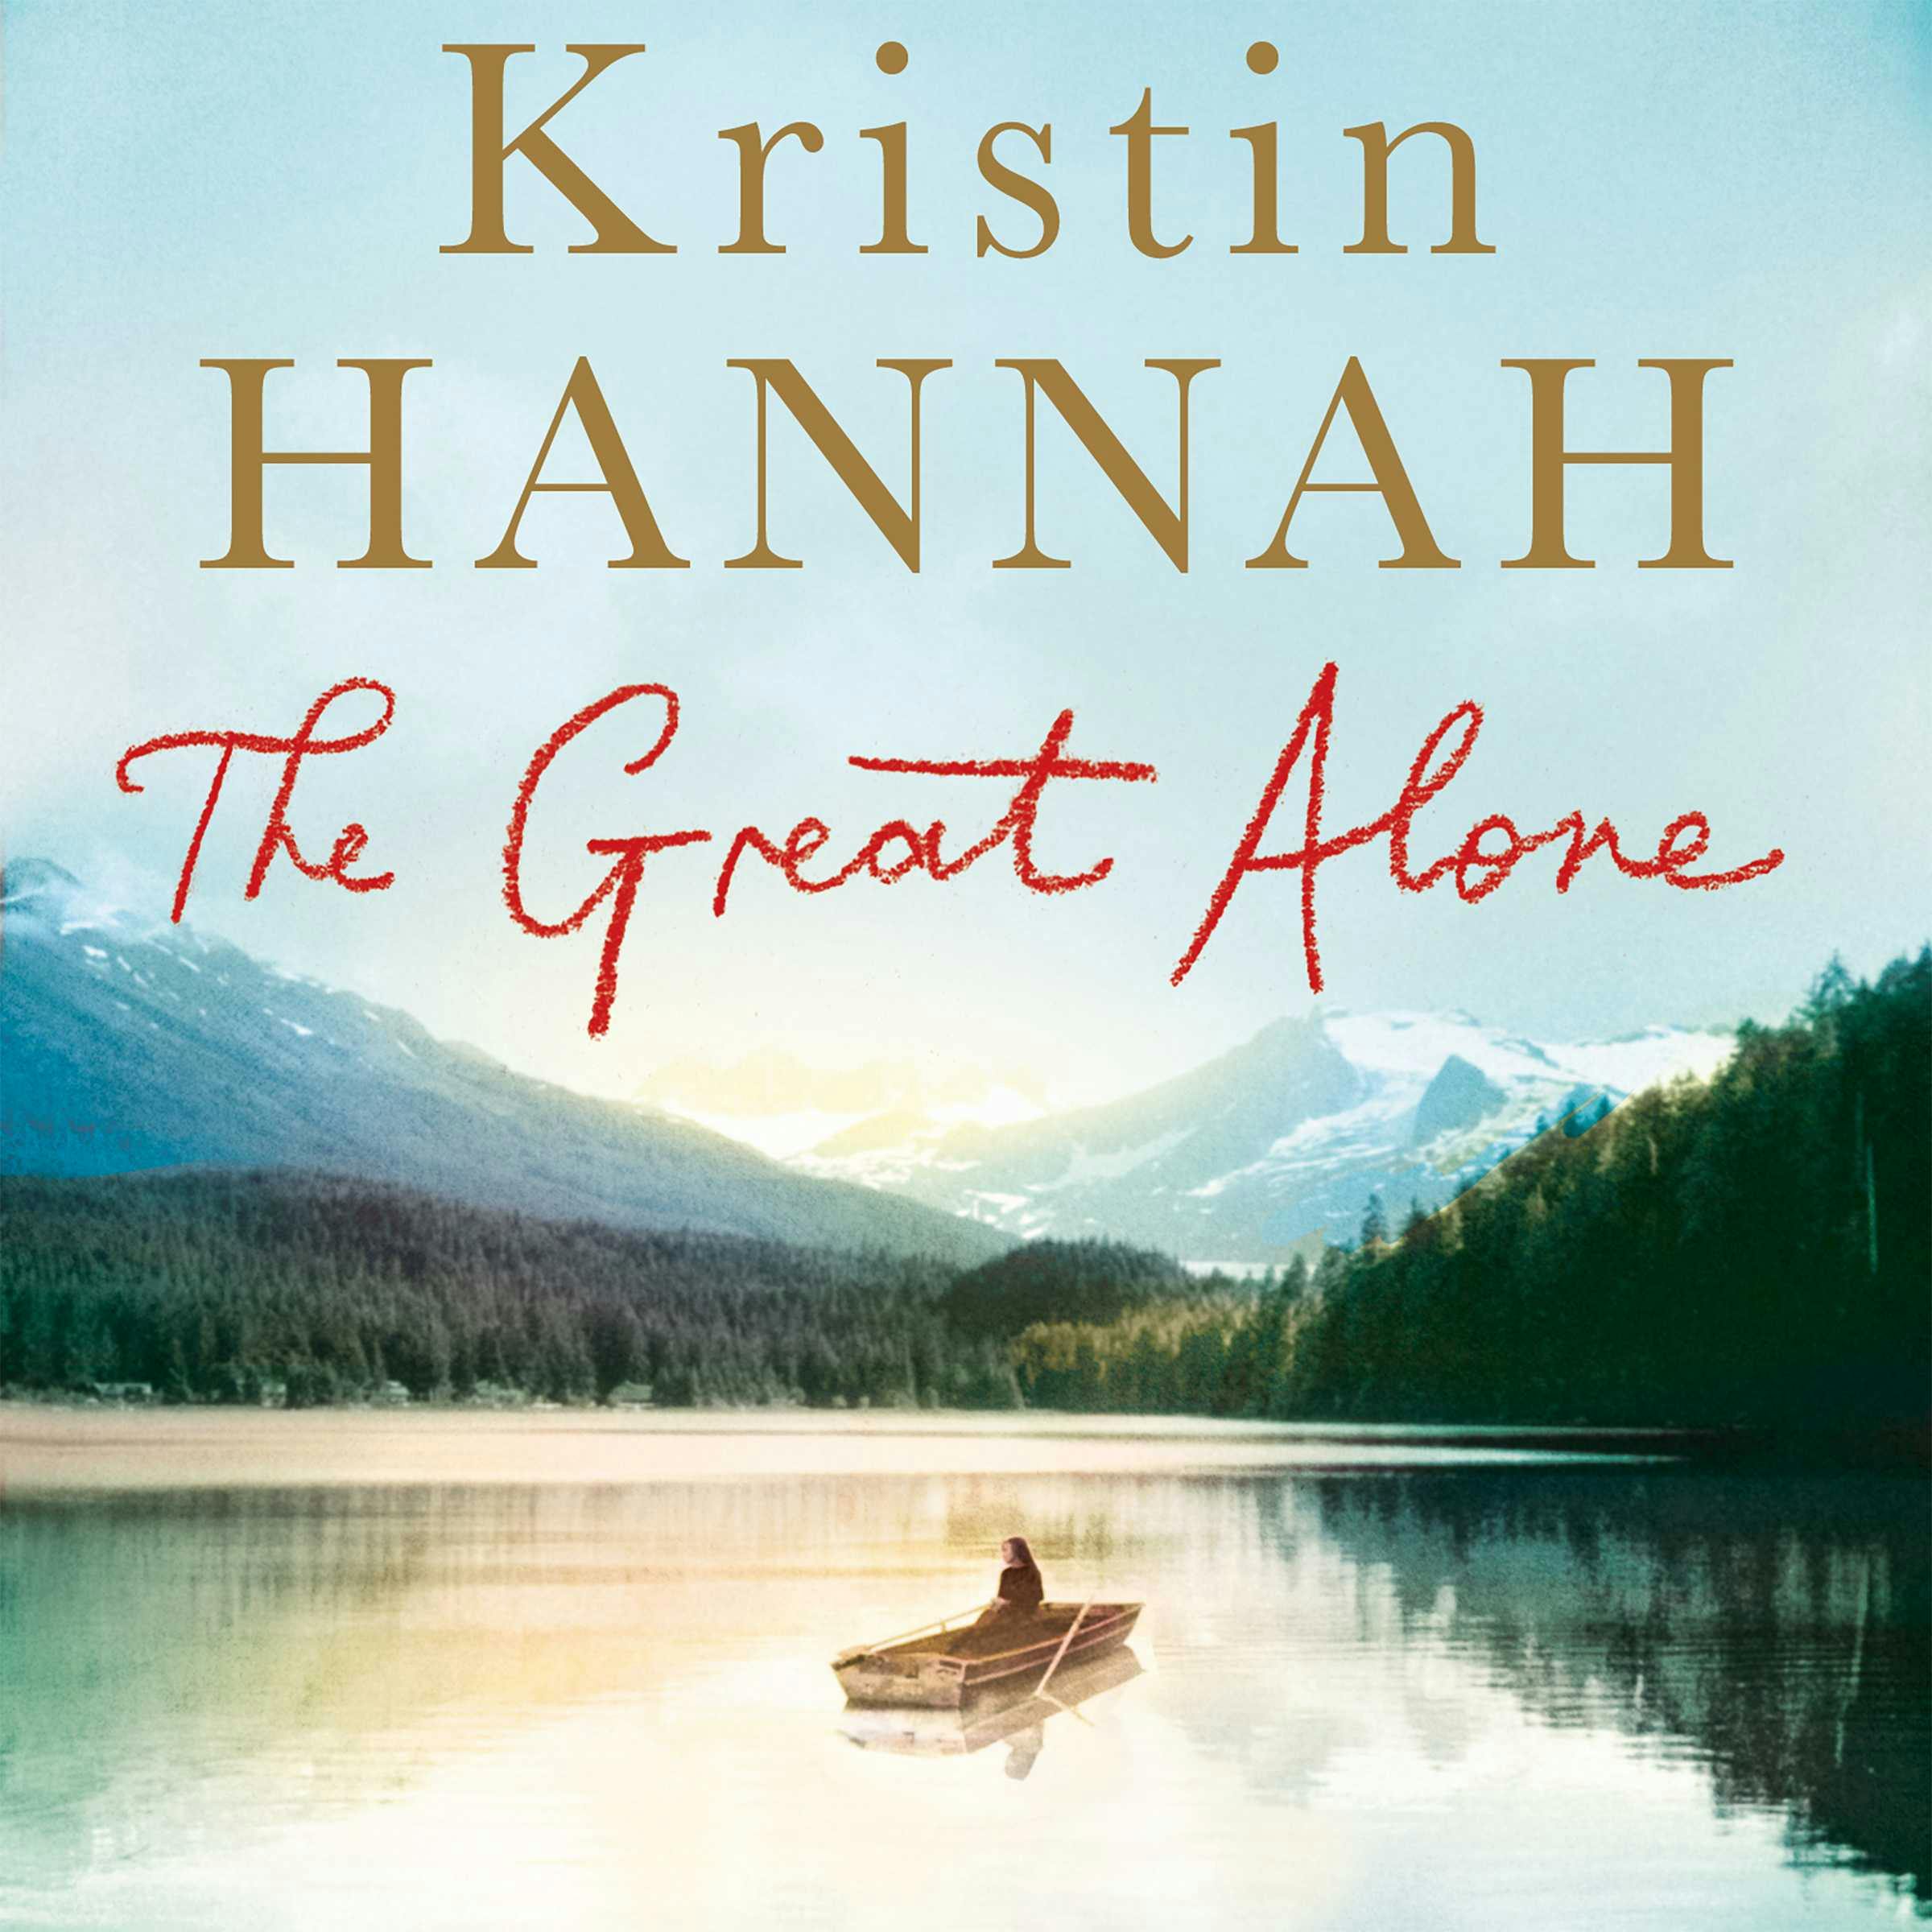 The Great Alone: A Compelling Story of Love, Heartbreak and Survival, From the Multi-million Copy Bestselling Author of The Nightingale - Kristin Hannah